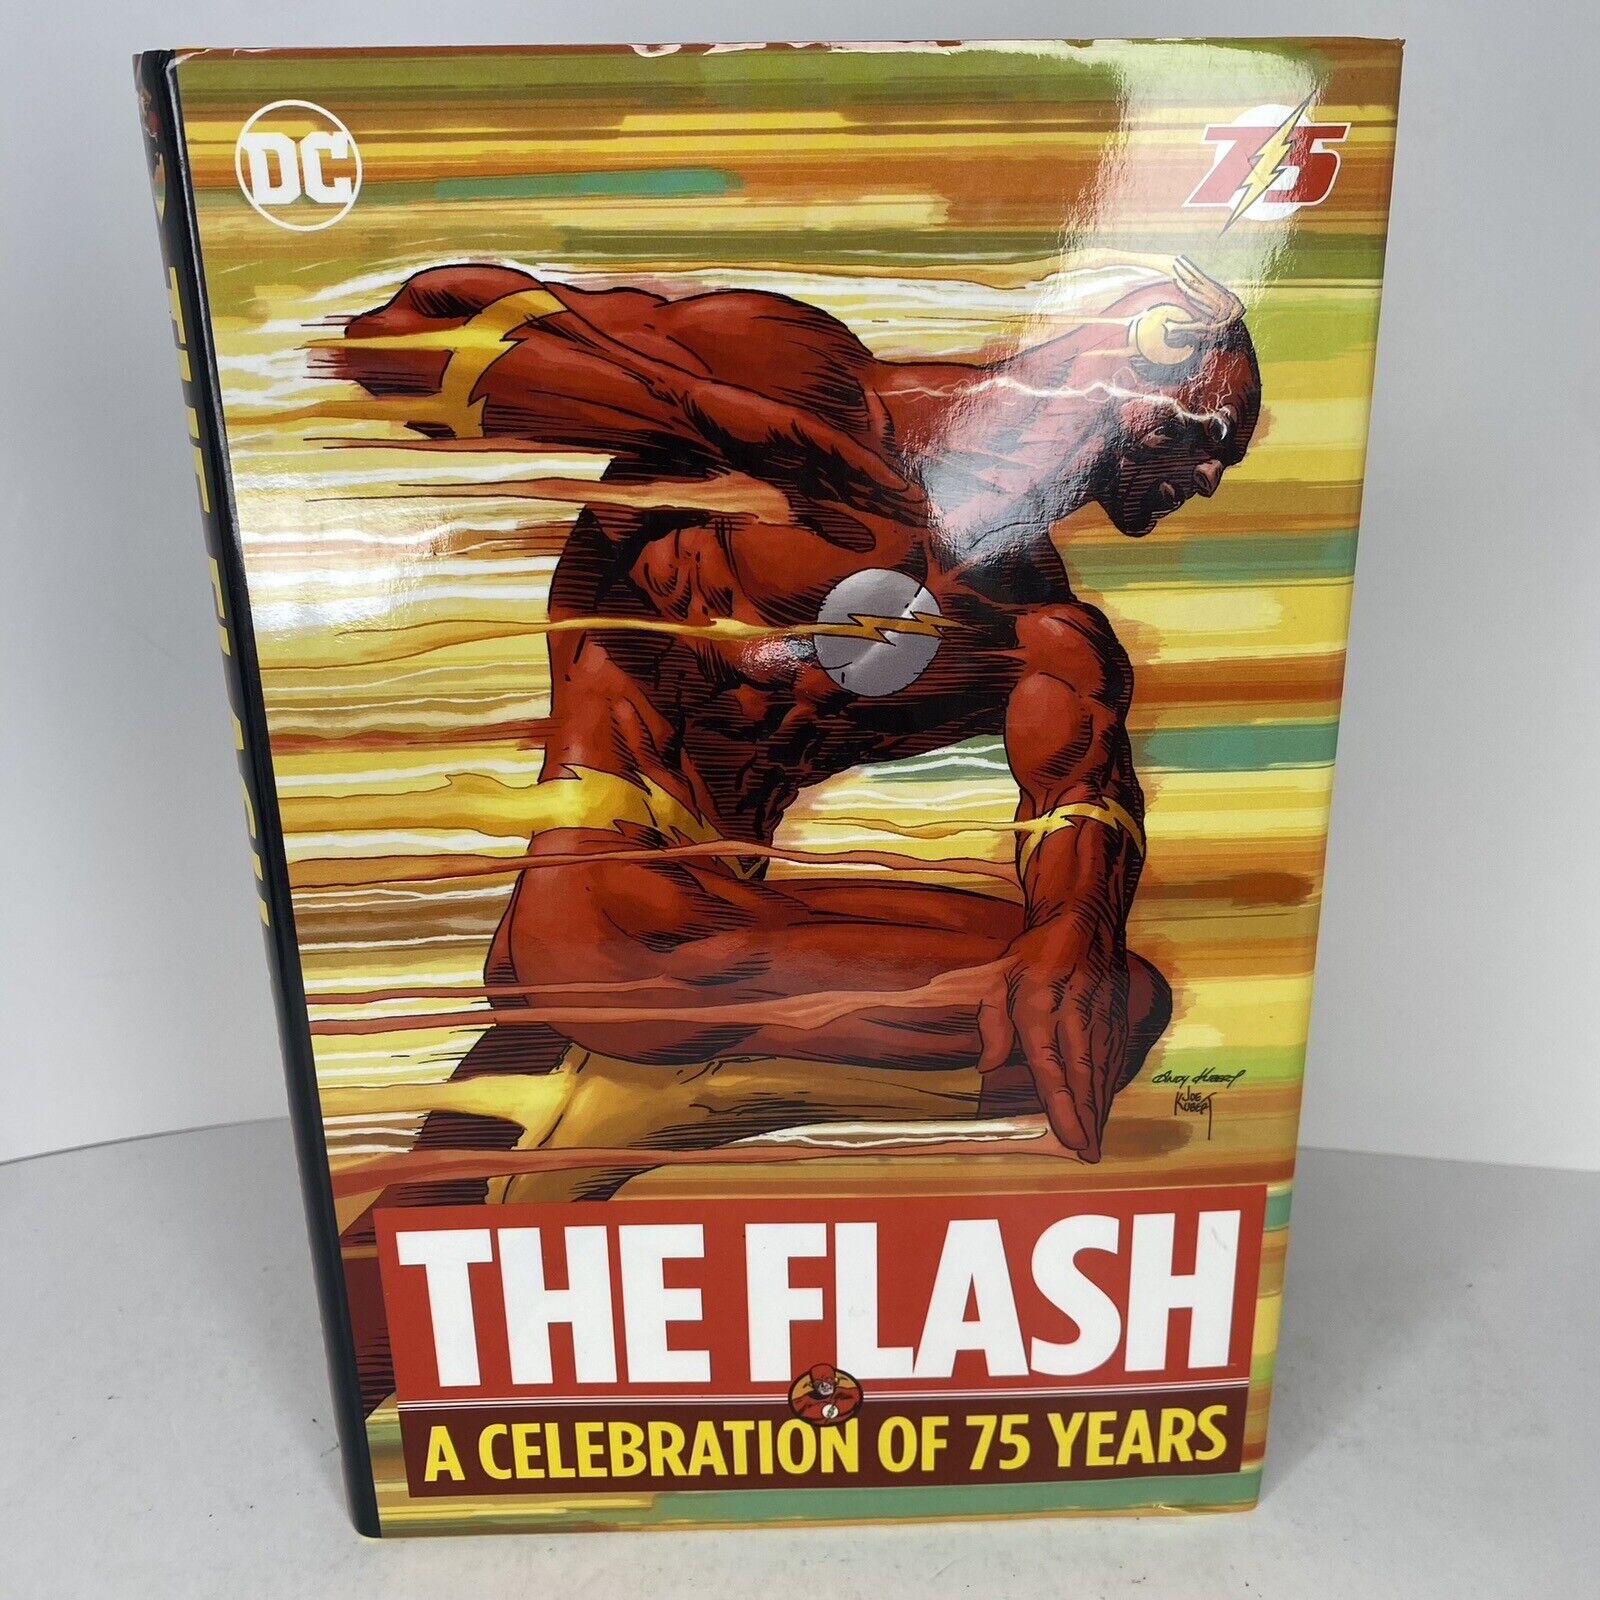 THE FLASH: A Celebration of 75 Years [DC 2015, 1st Print, Hardcover - Good